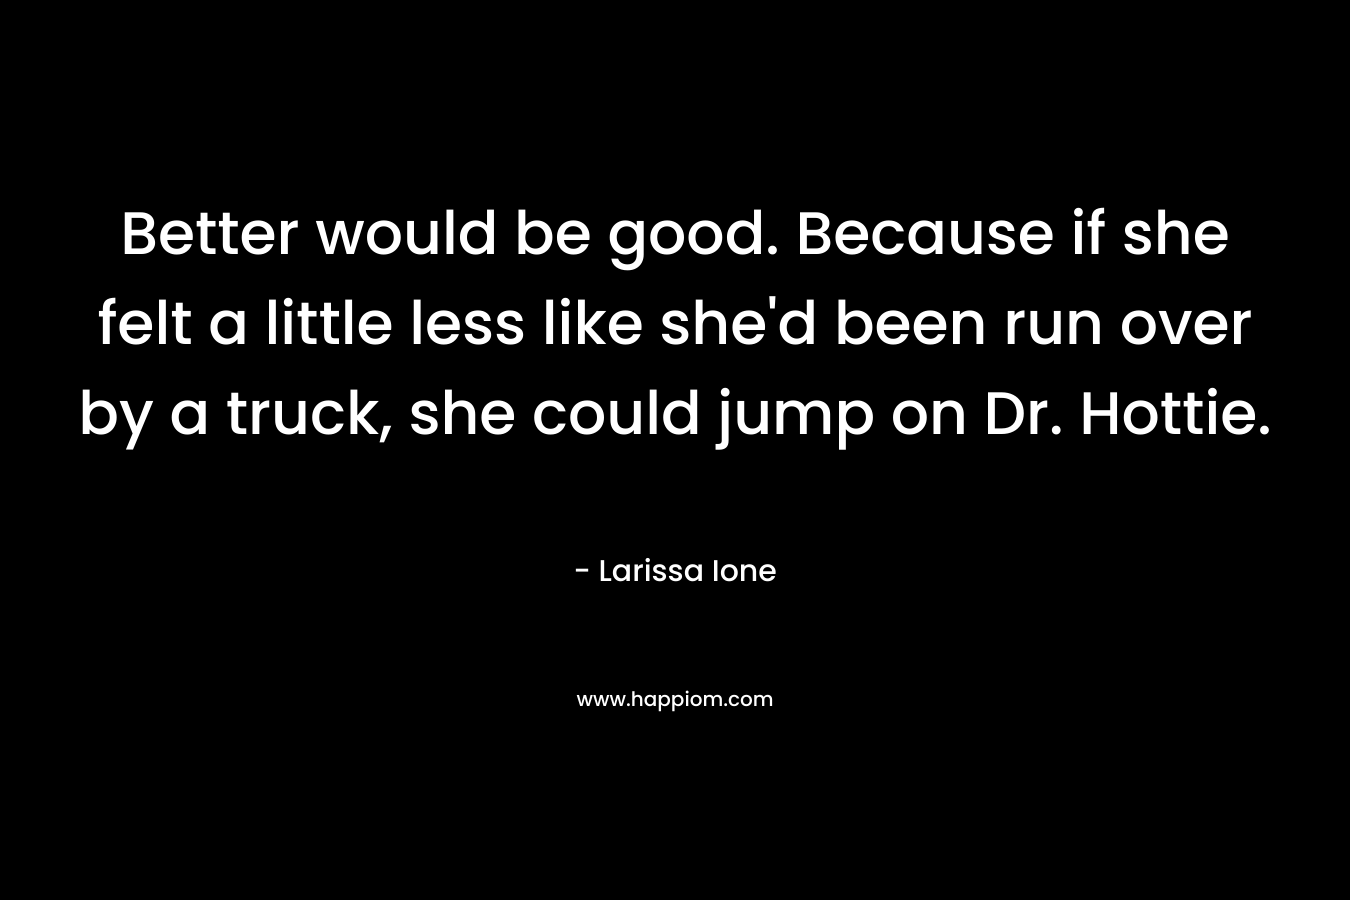 Better would be good. Because if she felt a little less like she'd been run over by a truck, she could jump on Dr. Hottie.